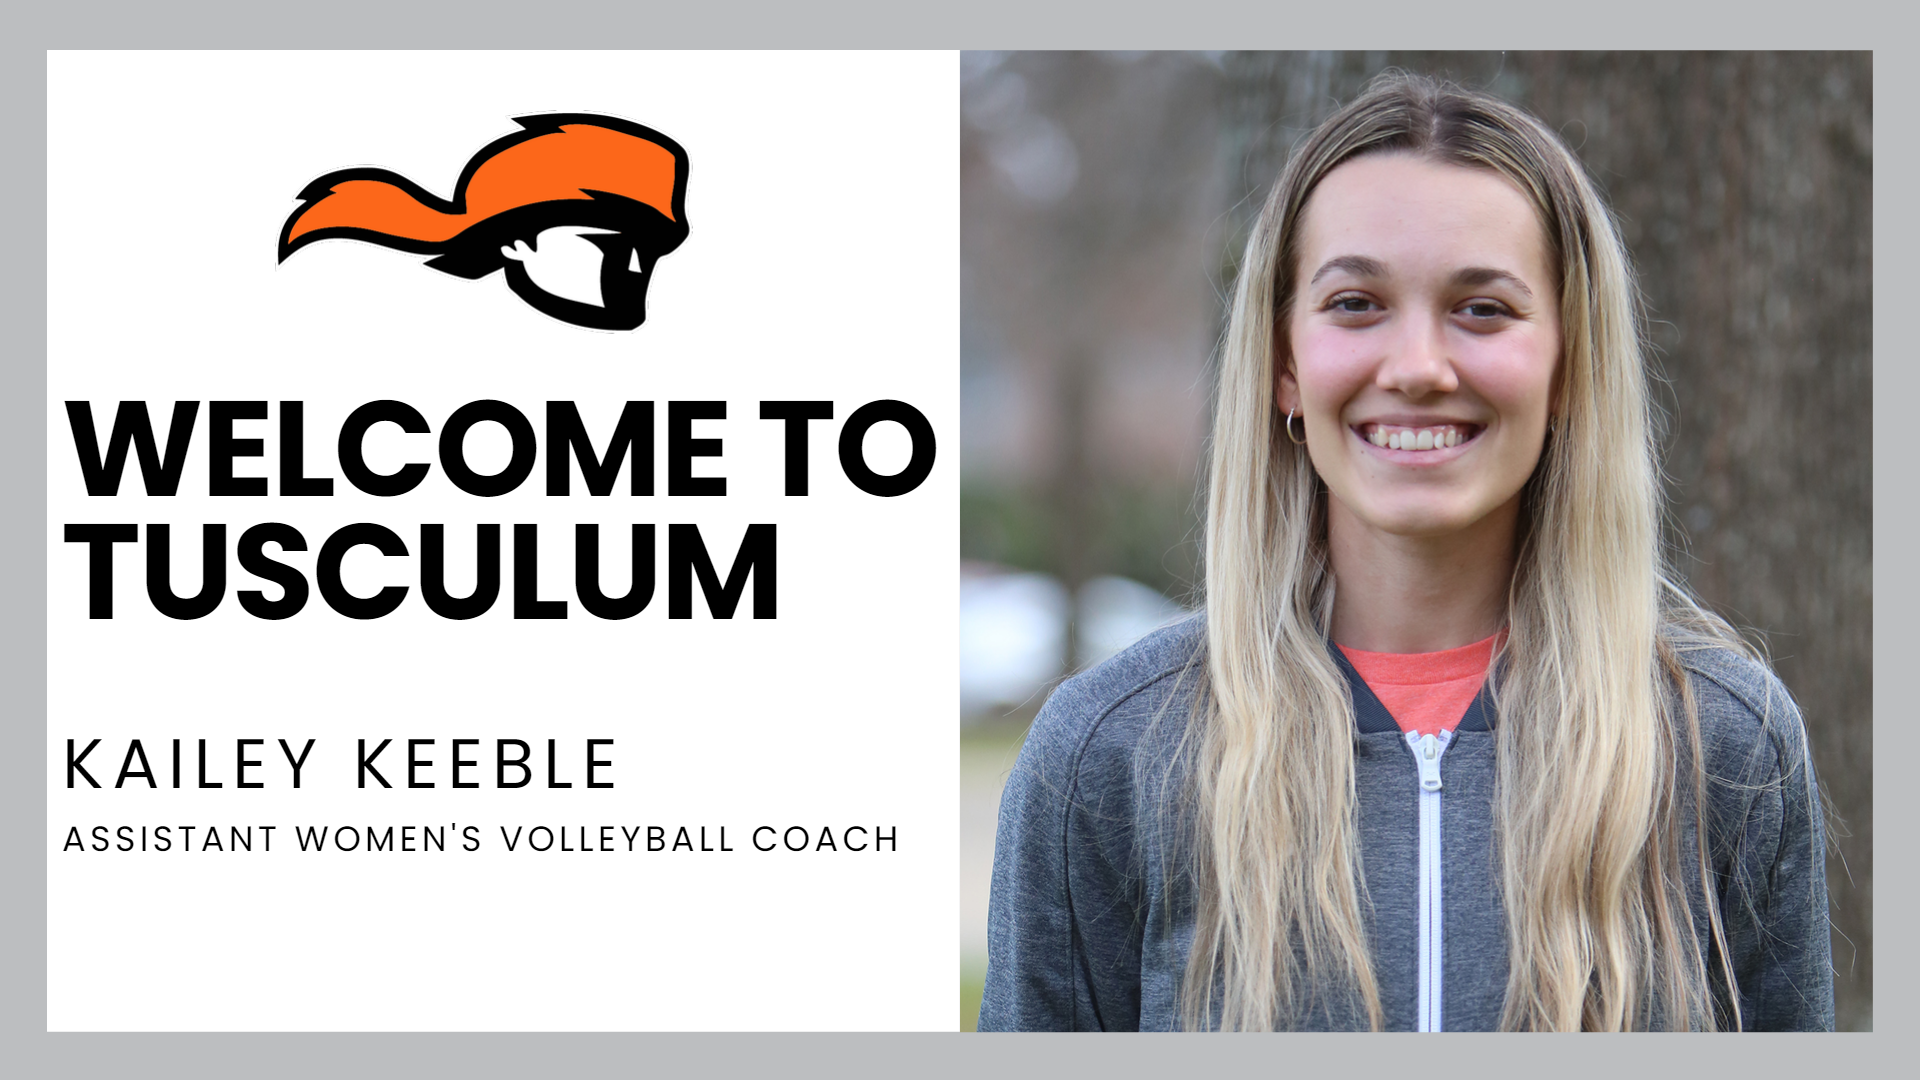 Kailey Keeble named assistant women's volleyball coach